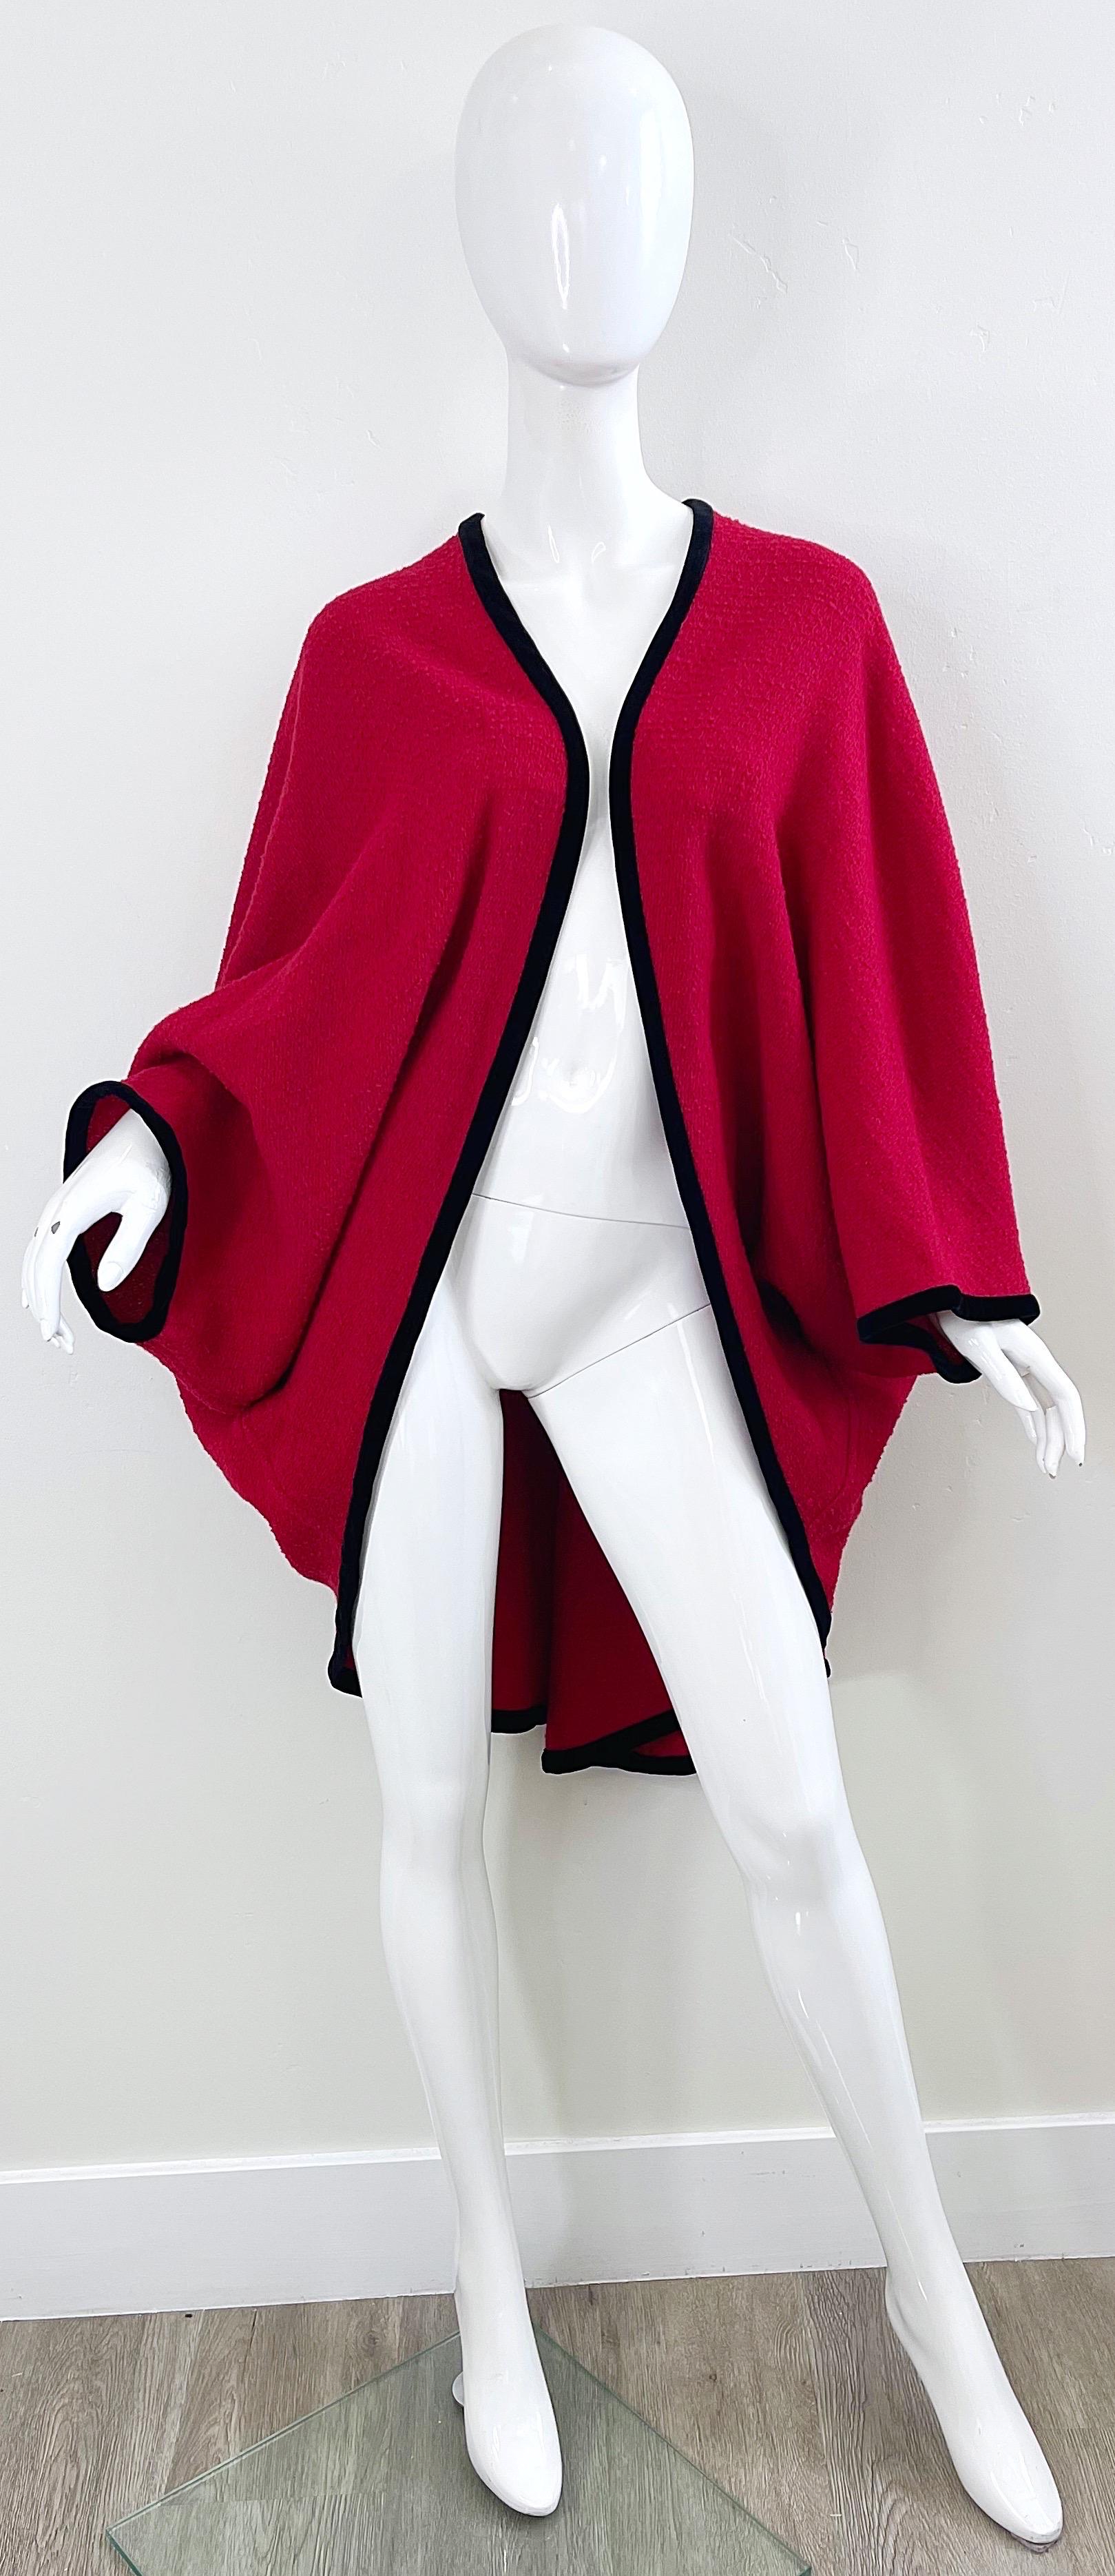 Karl Lagerfeld 1980s Lipstick Red Boiled Wool Cocoon Vintage Cape Kimono Jacket For Sale 4